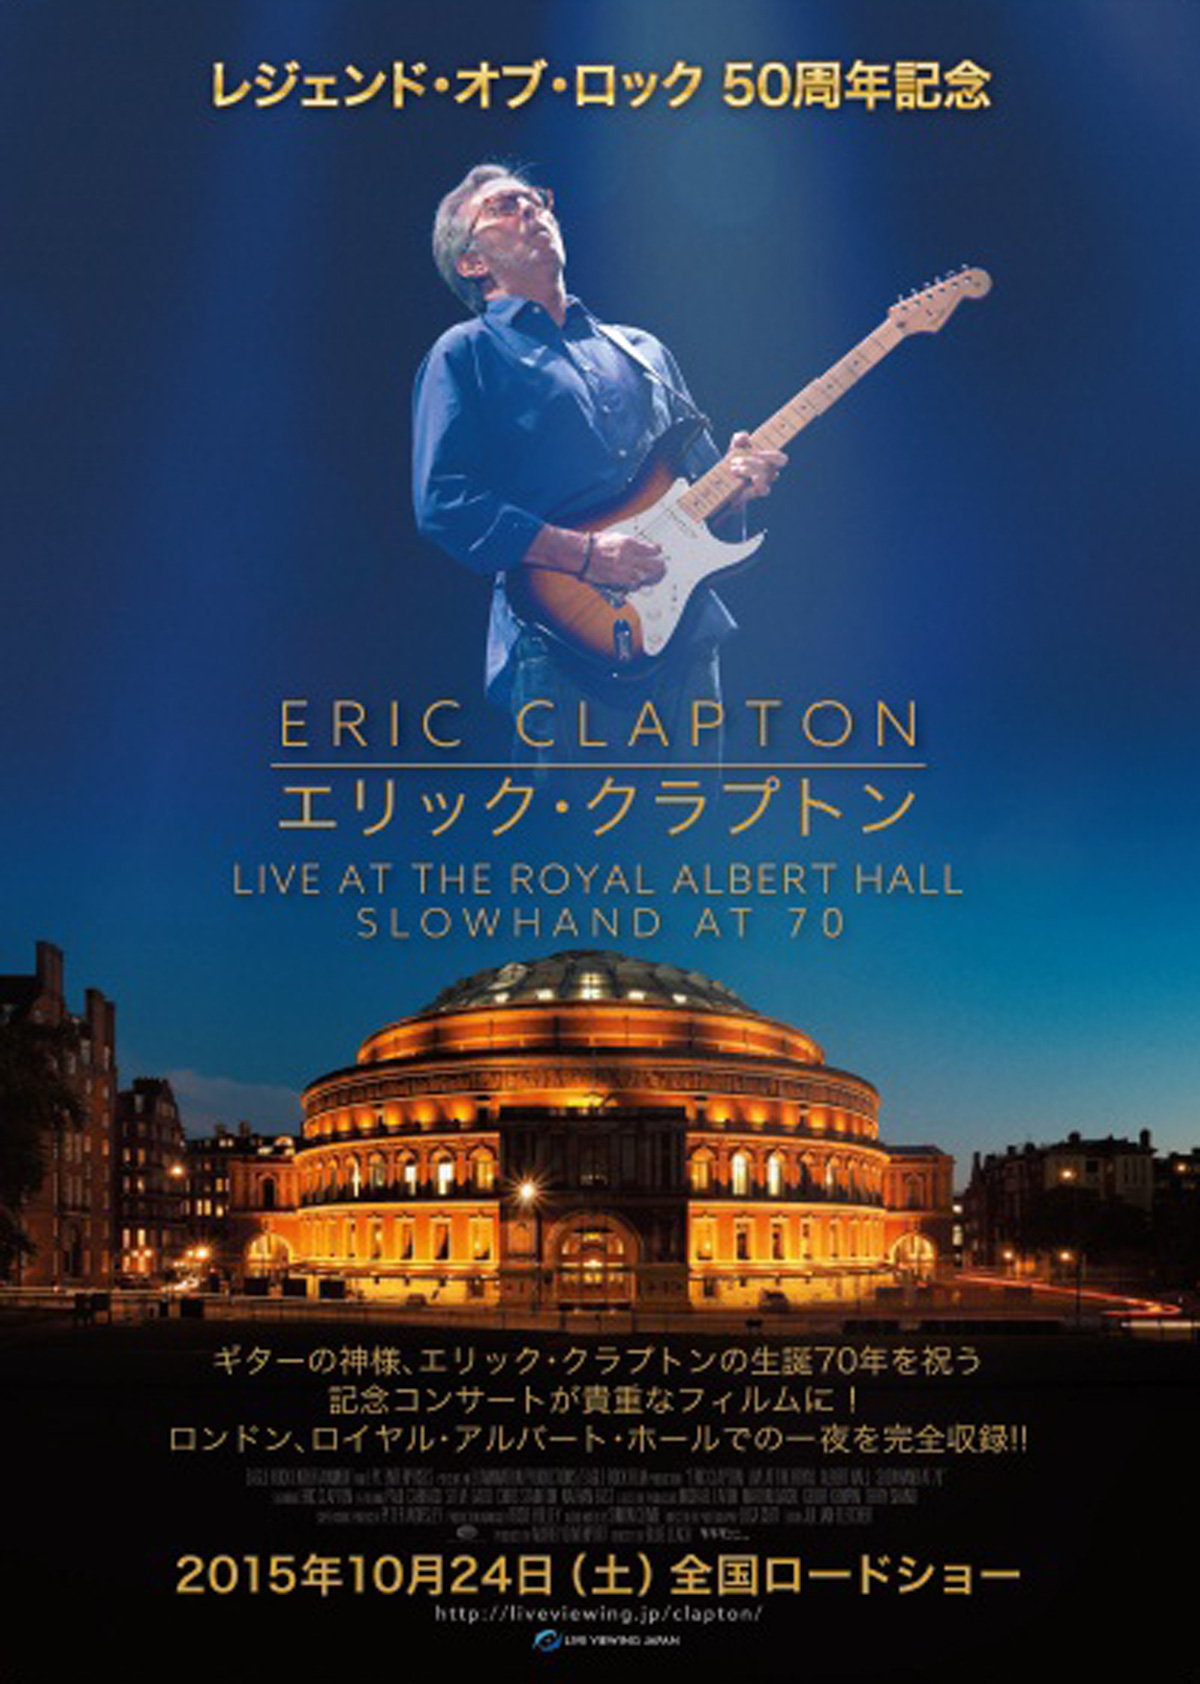 ERIC CLAPTON / エリック・クラプトン　Live at the Royal Albert Hall | Slowhand at 70の画像